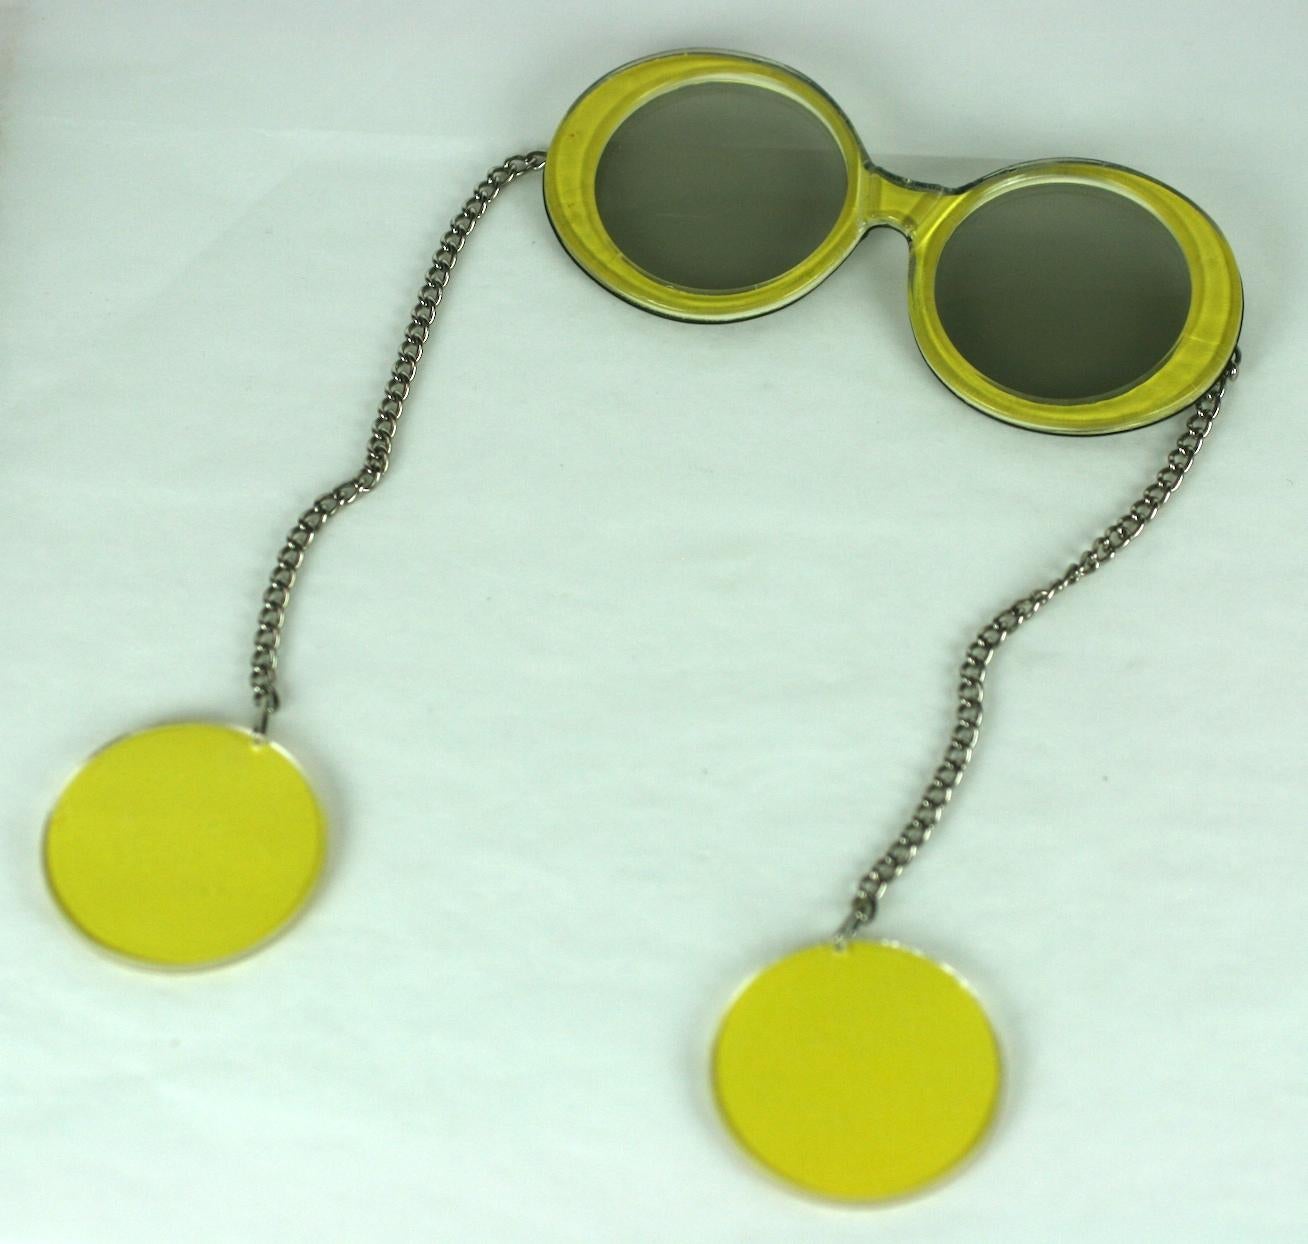 Fun Mod Glasses with Earrings Combo from the 1960's.  Instead of arms, there are chains with suspended yellow plastic discs which form earrings when worn. 1960's USA. 
5.5